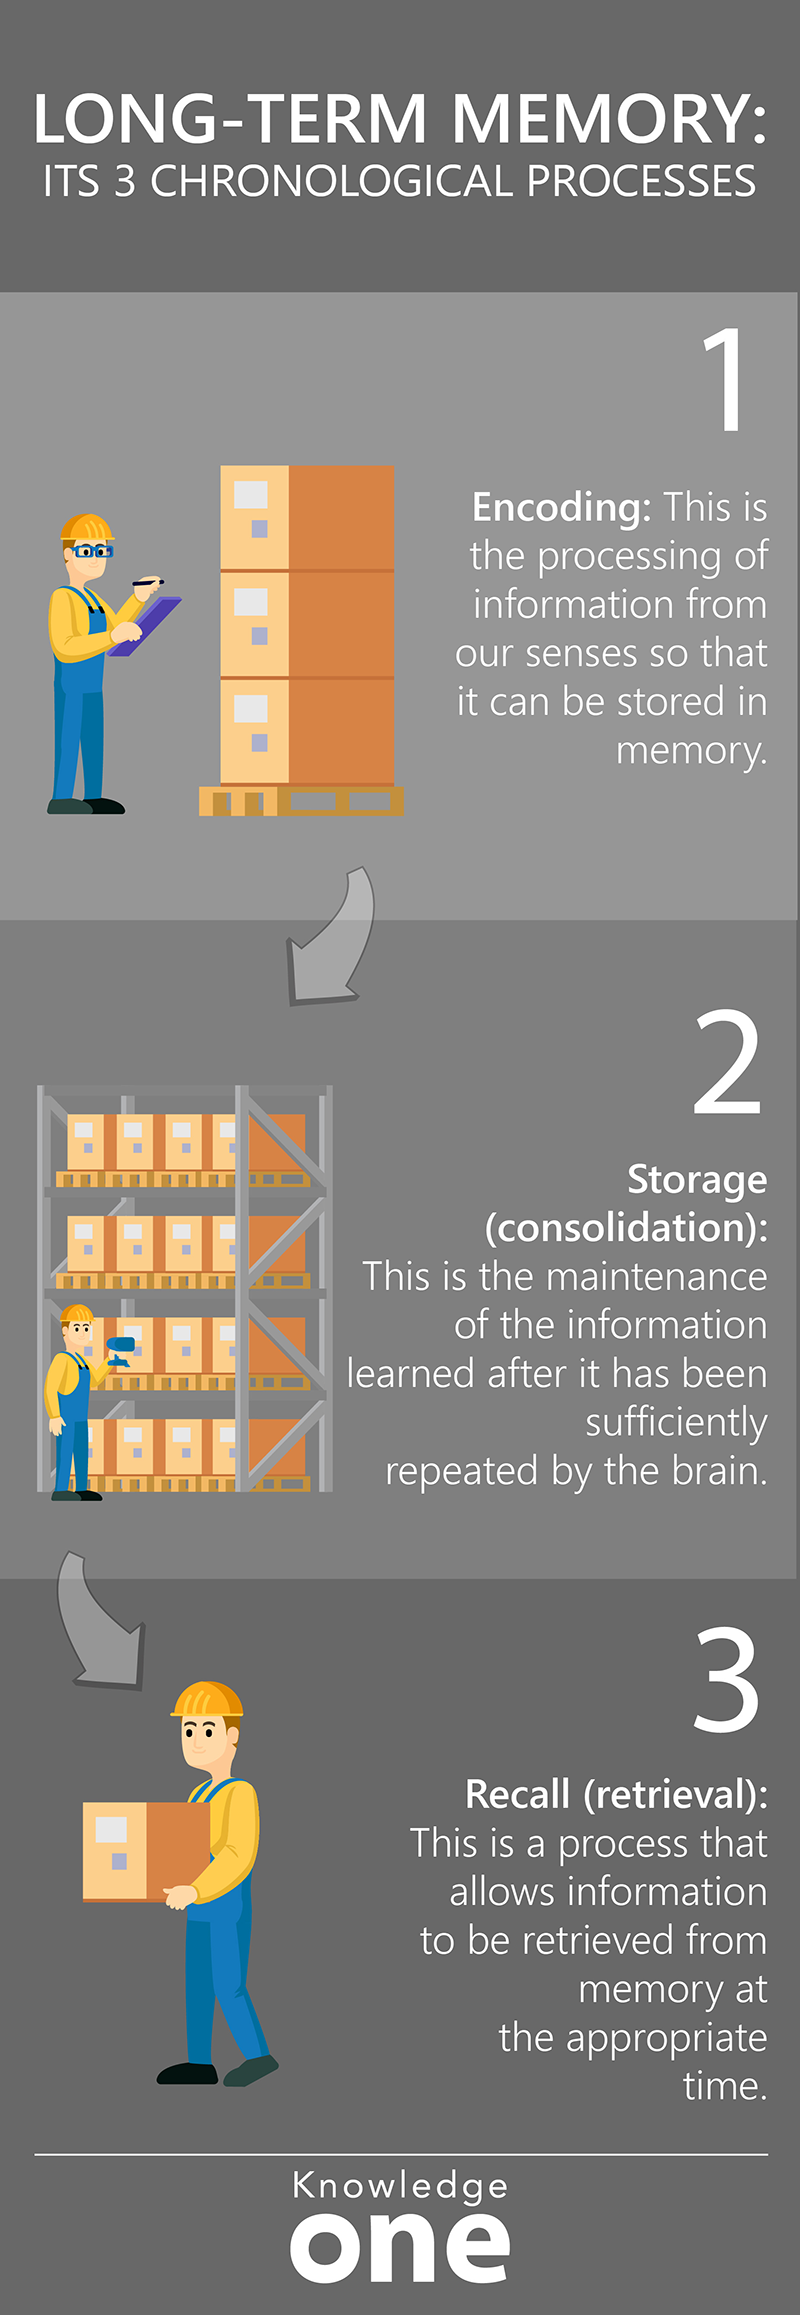 infographic on the 3 Chronological Processes of the Long-Term Memory